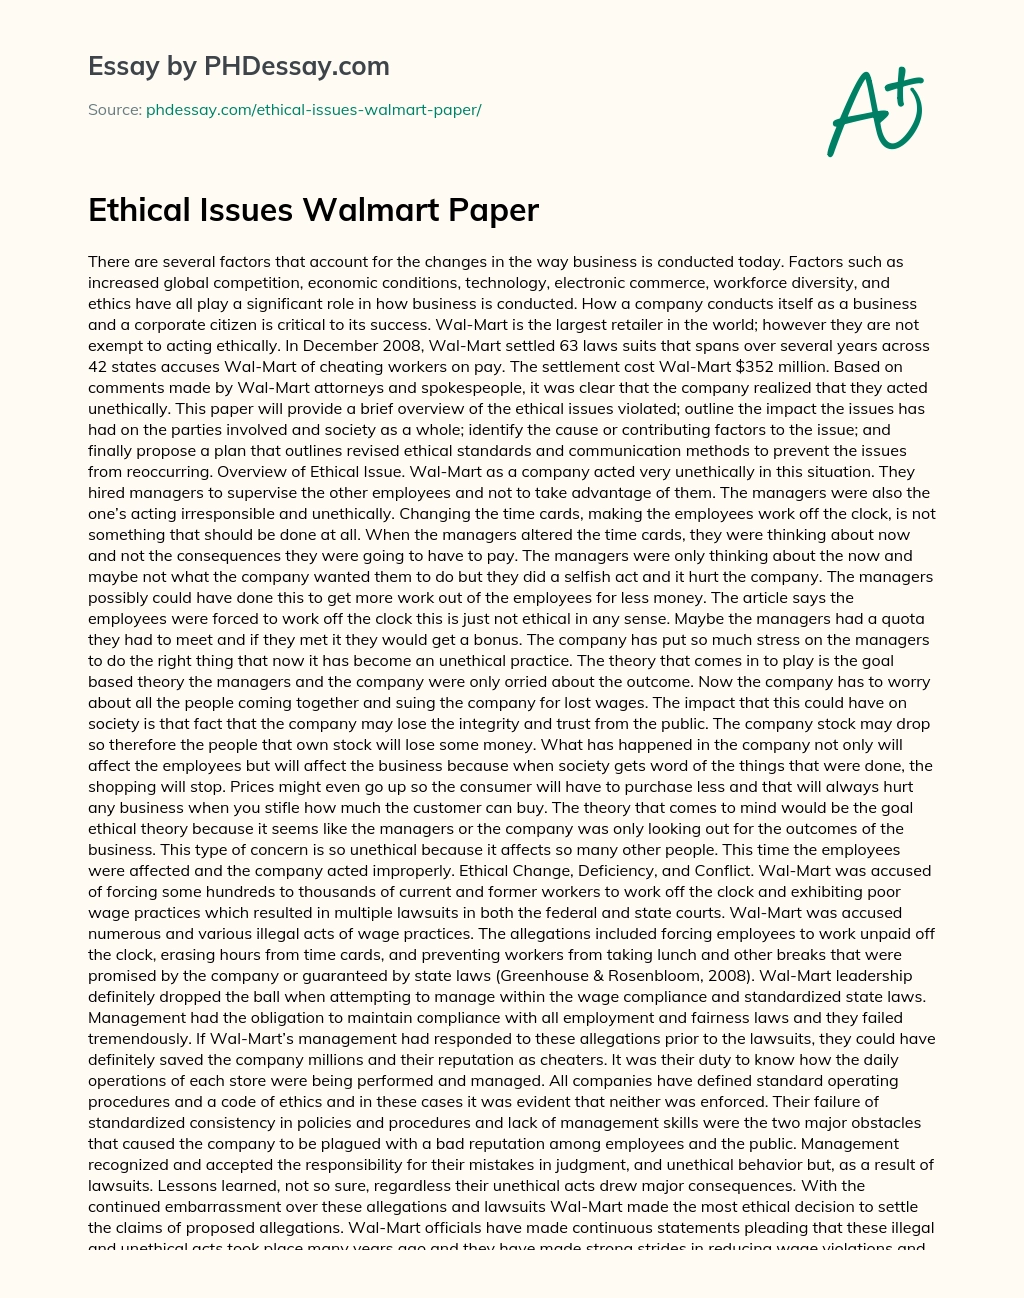 Ethical Issues Walmart Paper essay